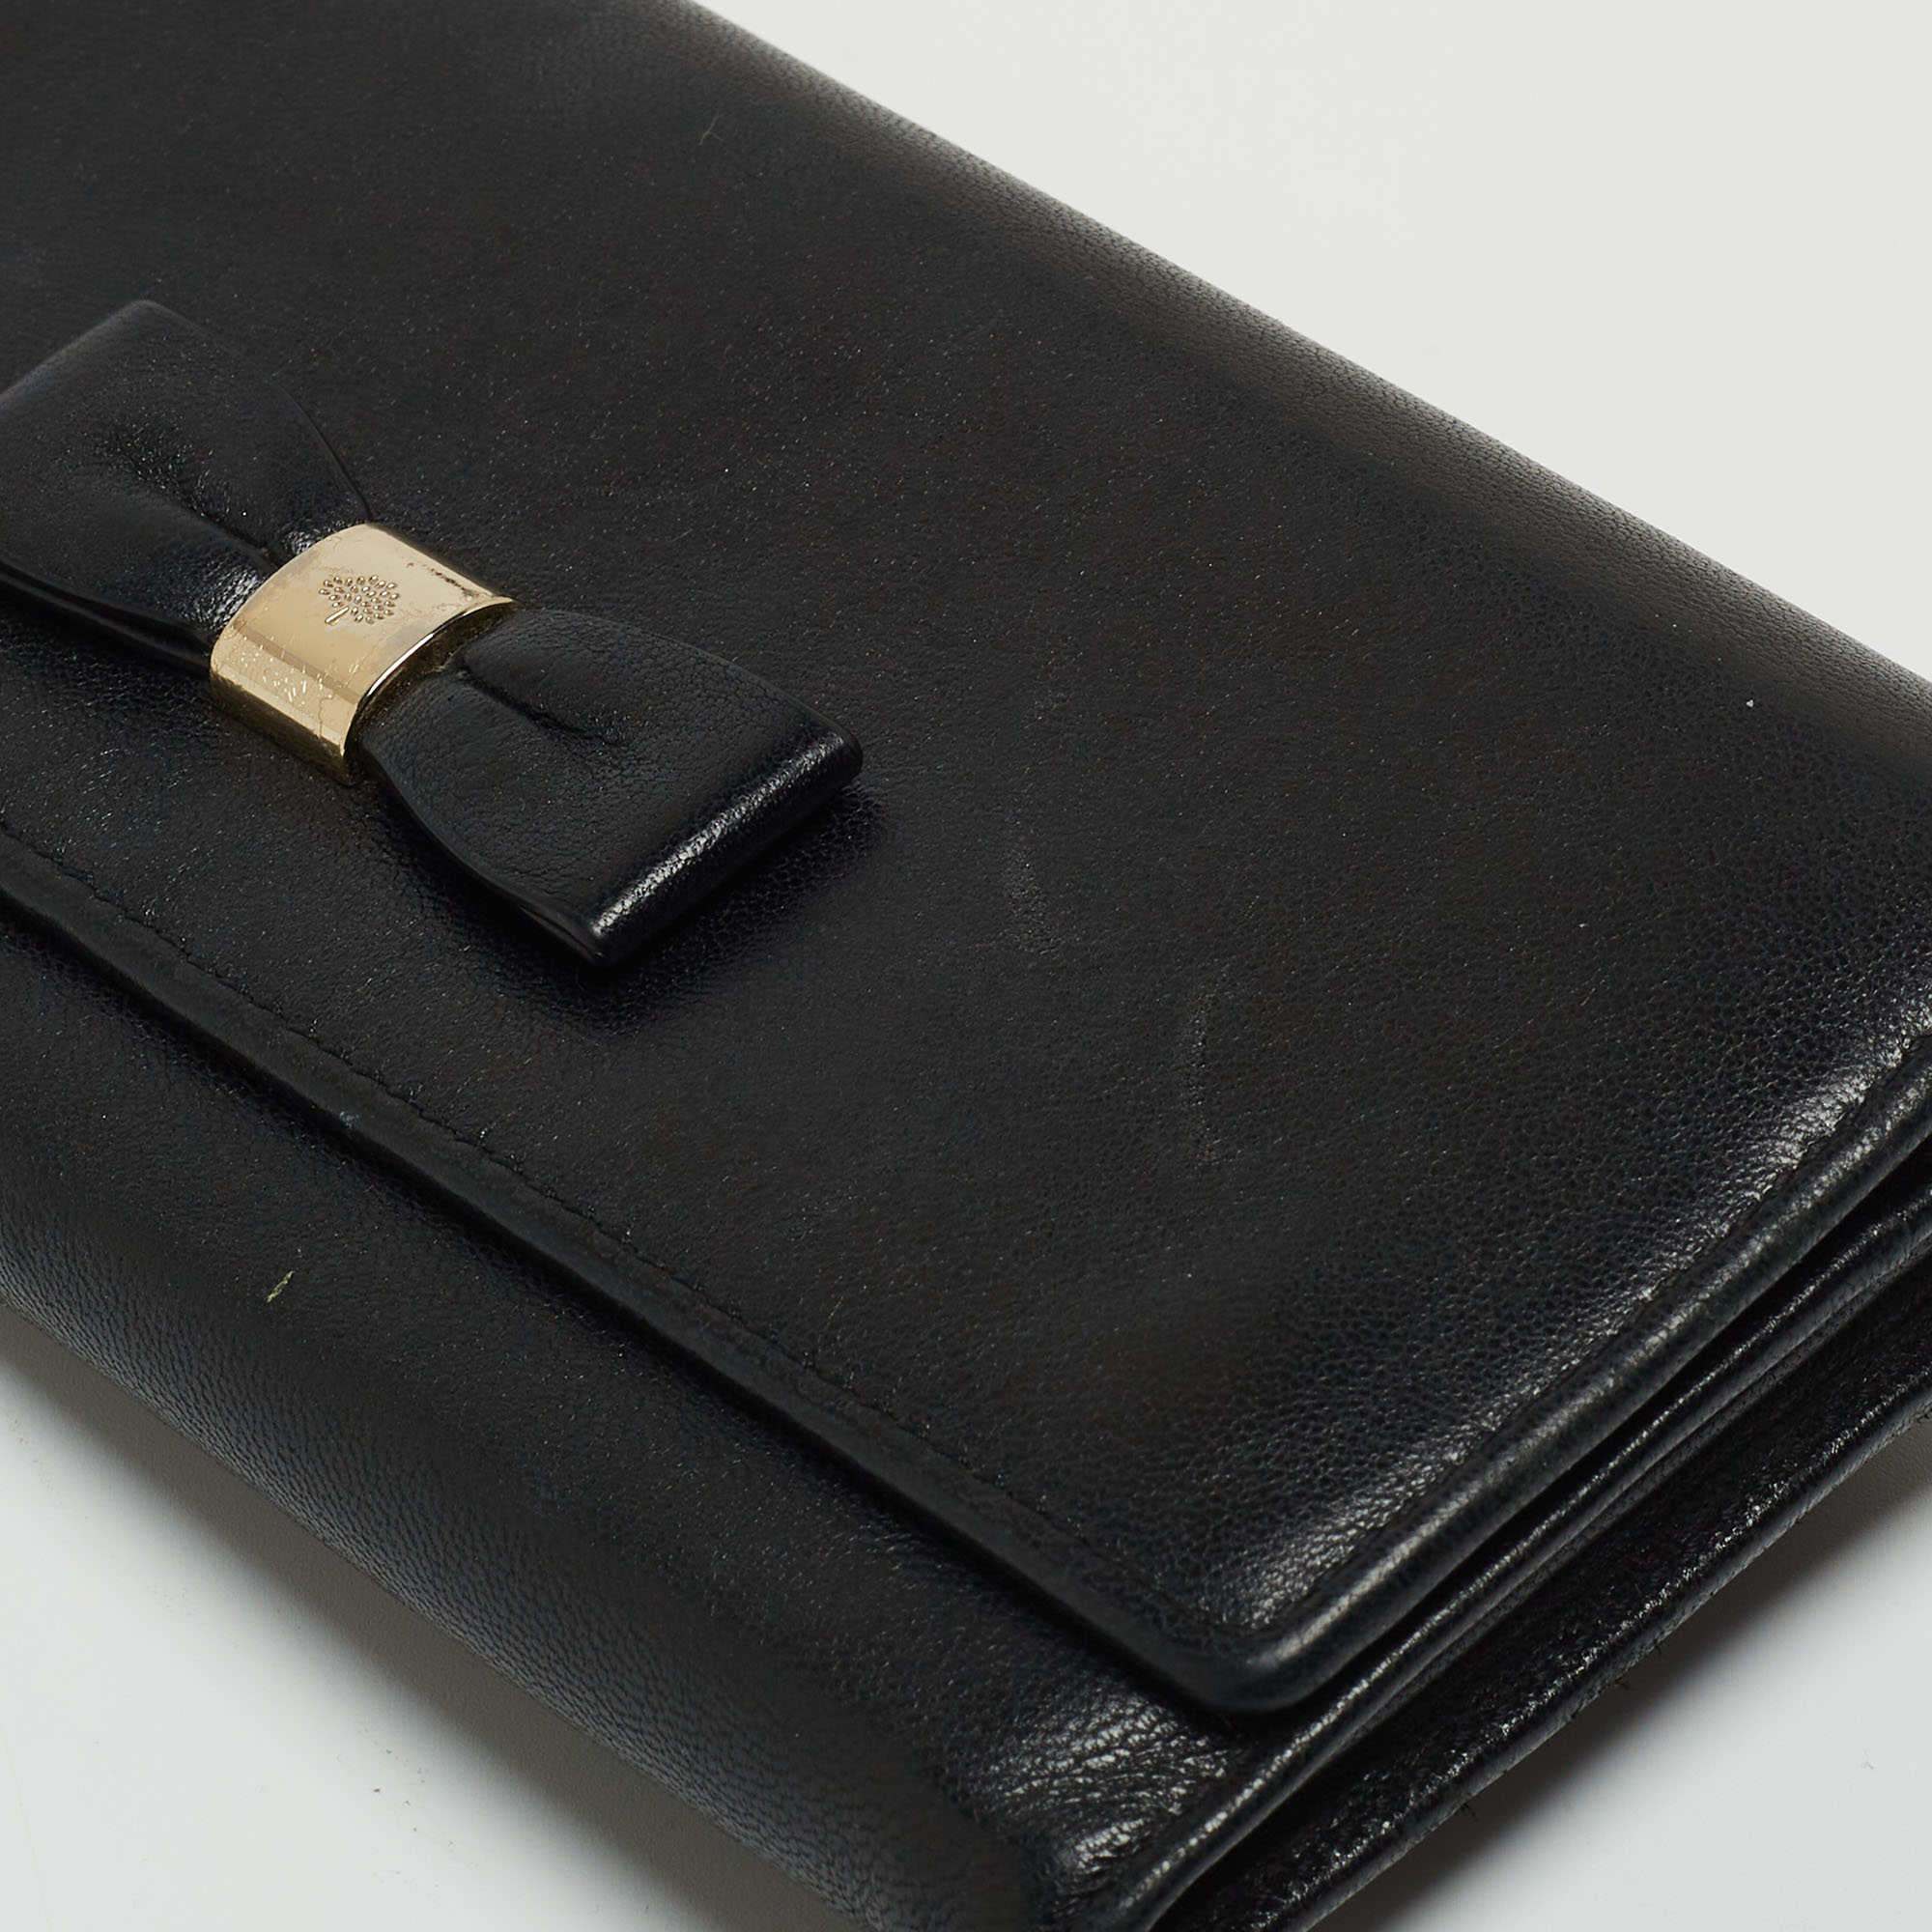 Mulberry Black Leather Bow Continental Wallet